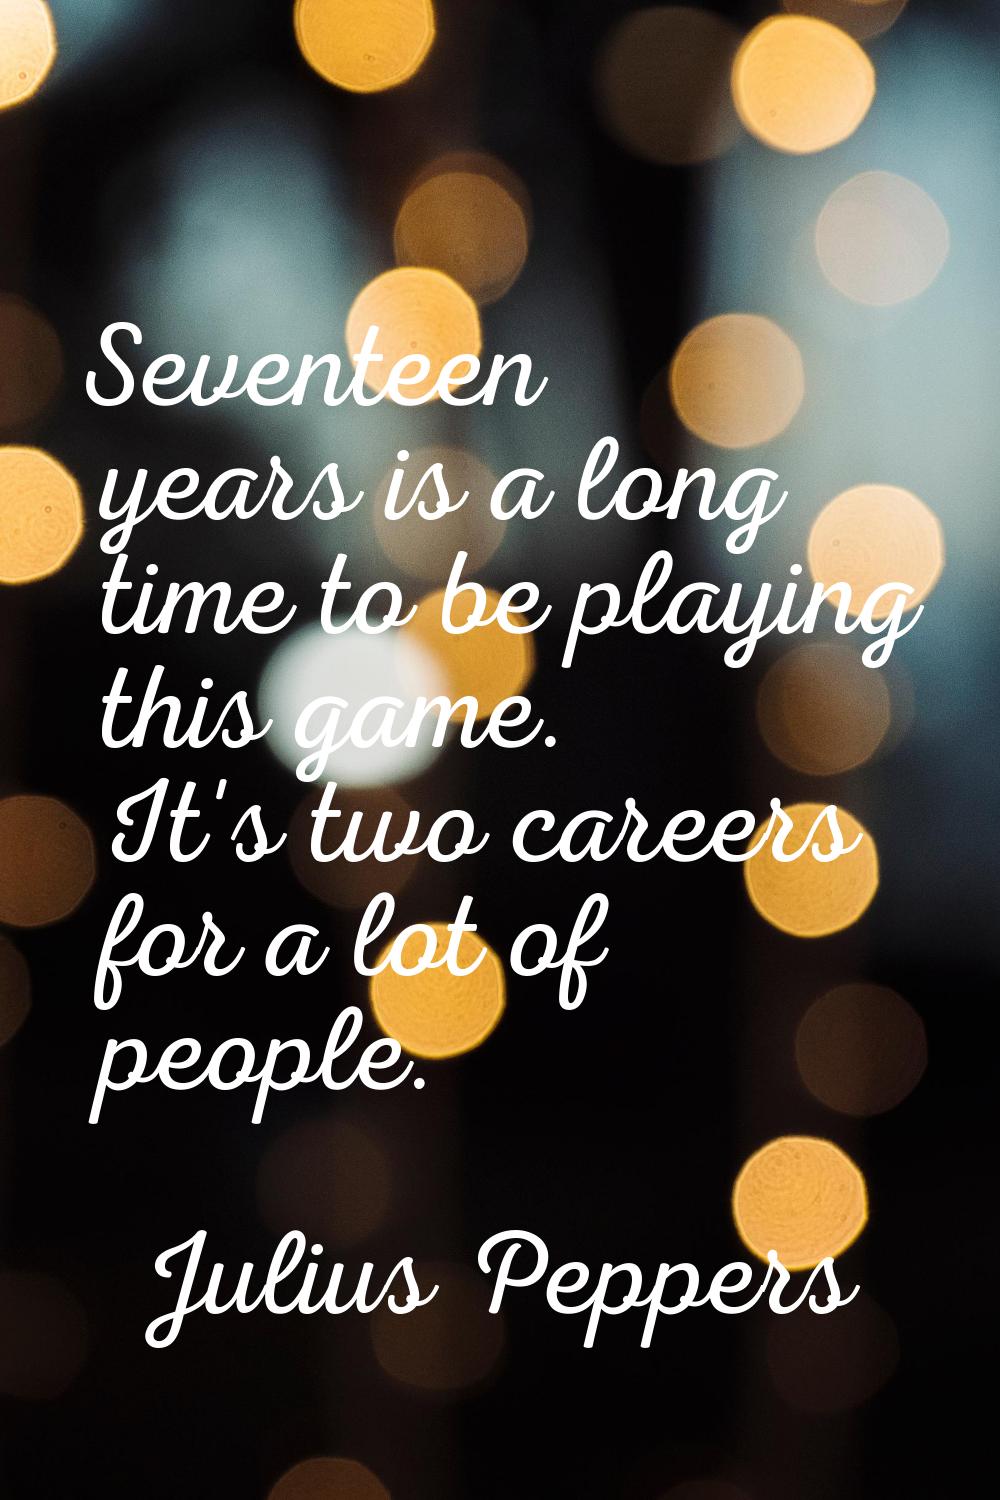 Seventeen years is a long time to be playing this game. It's two careers for a lot of people.